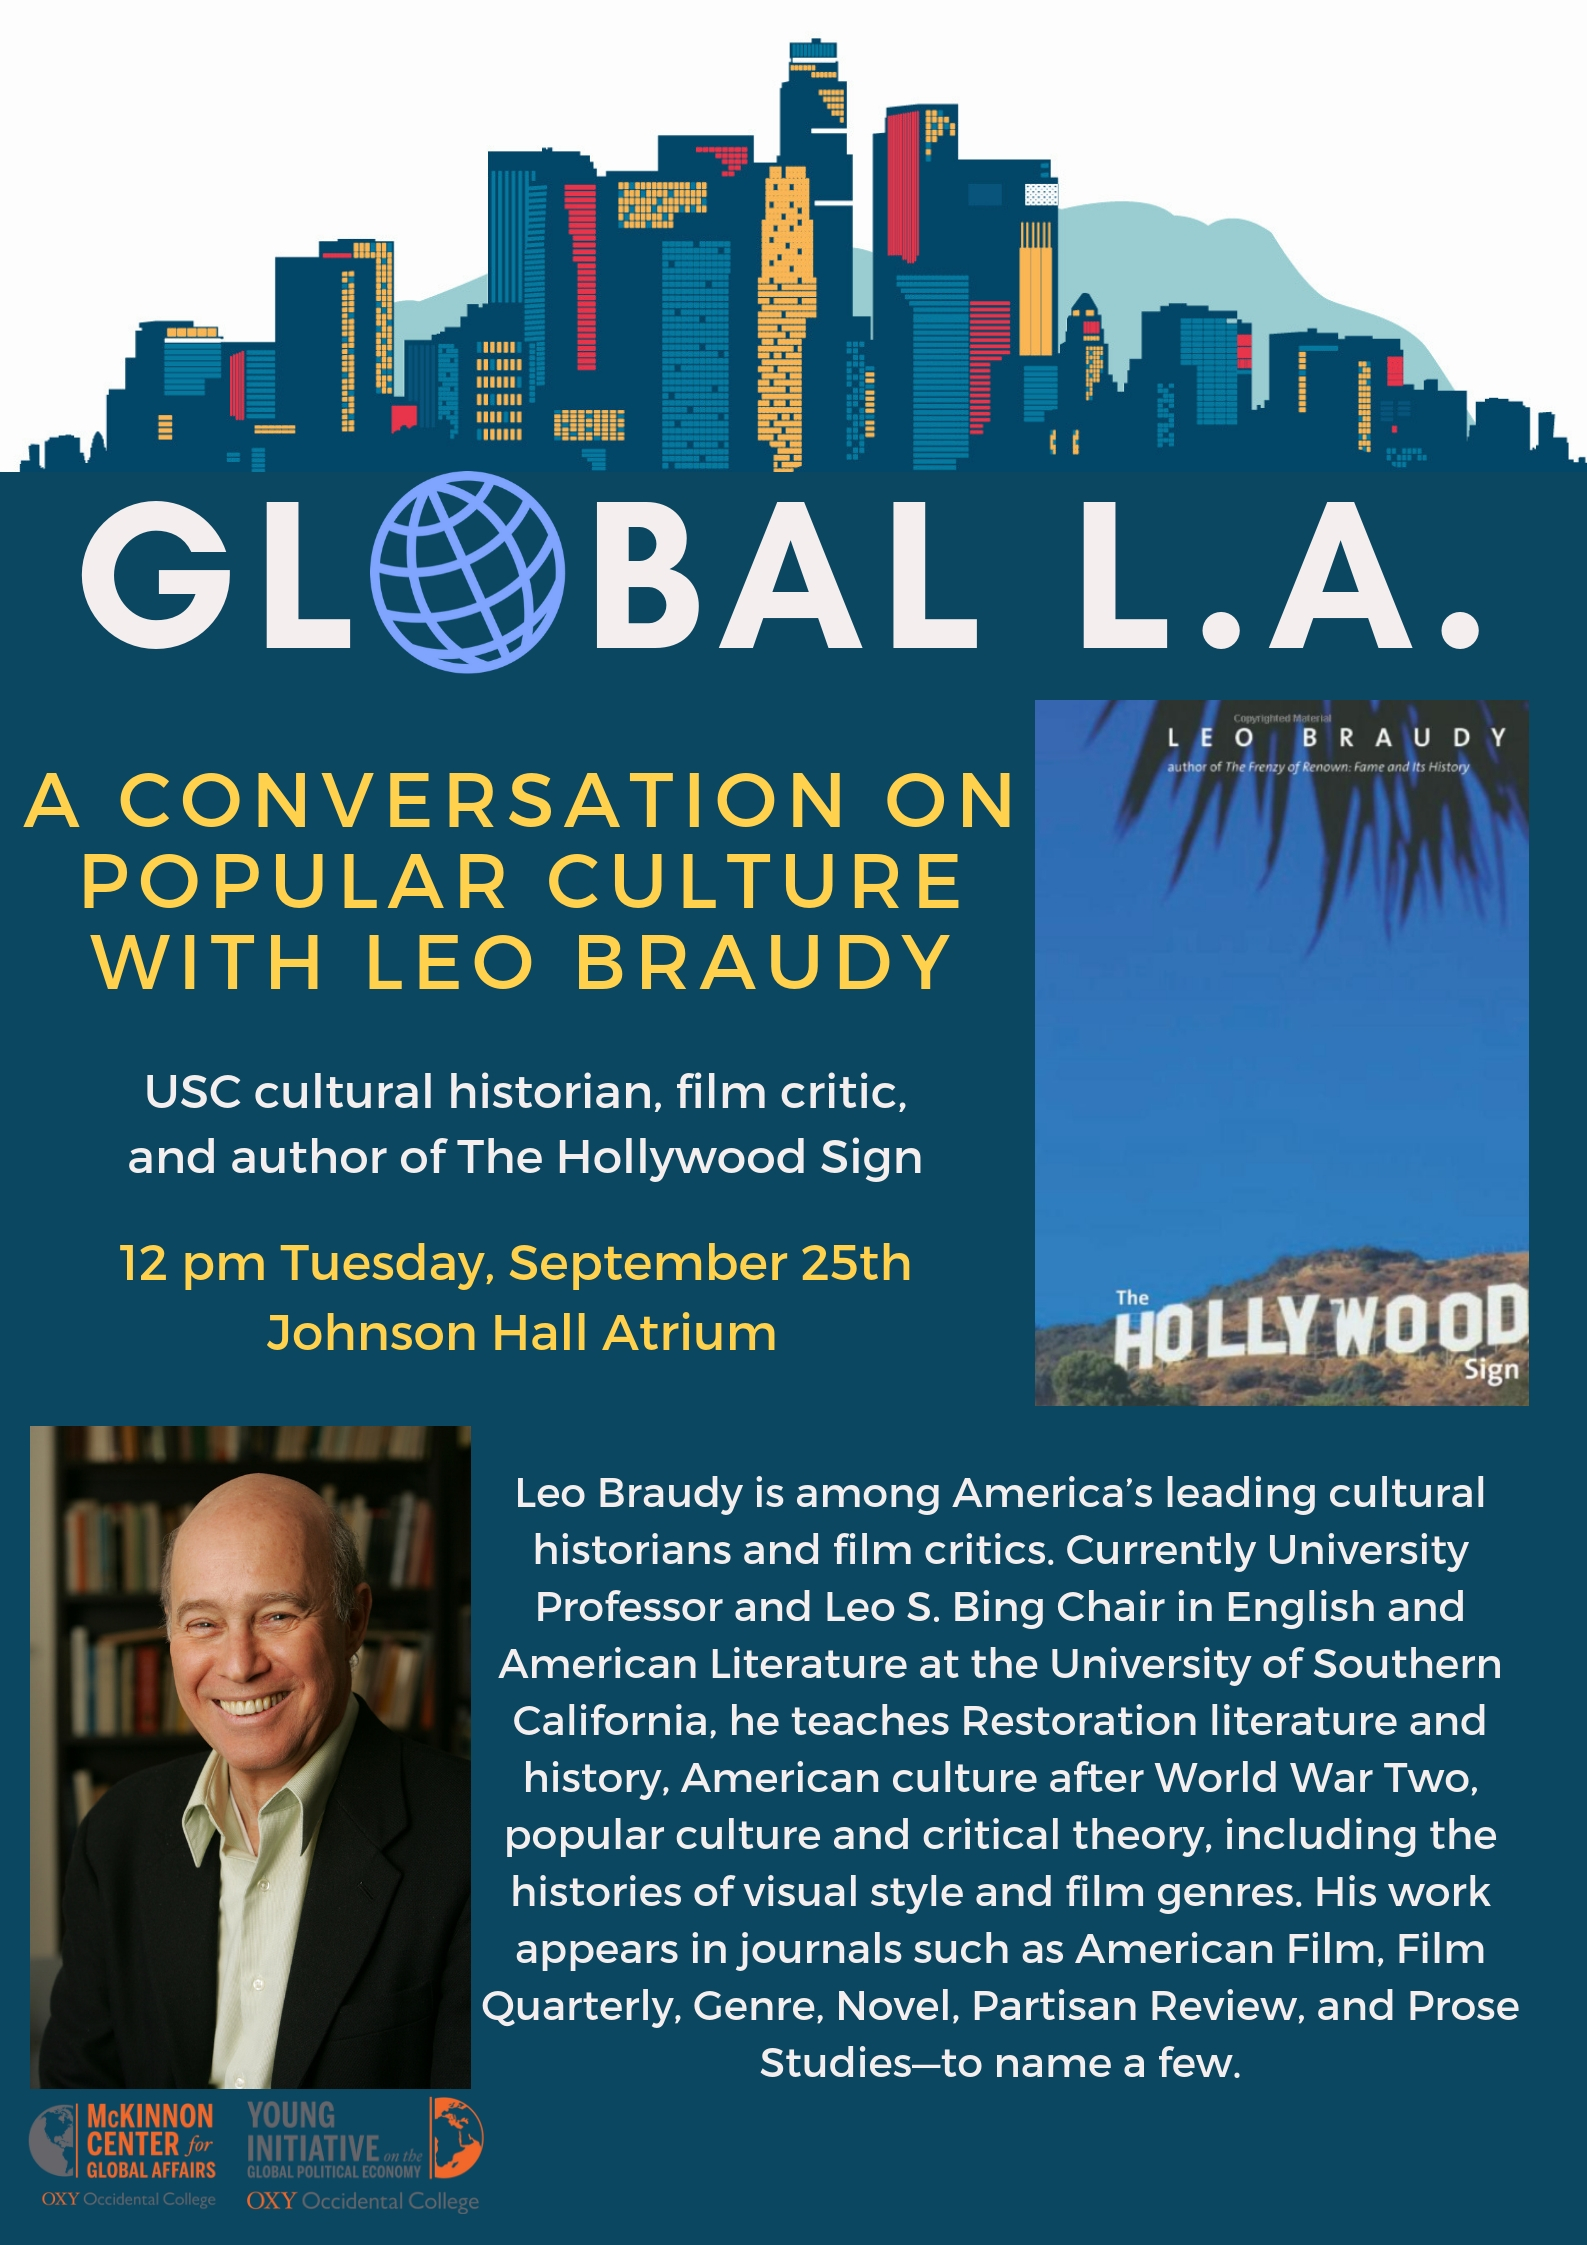 Image for Global L.A. with Leo Braudy Event